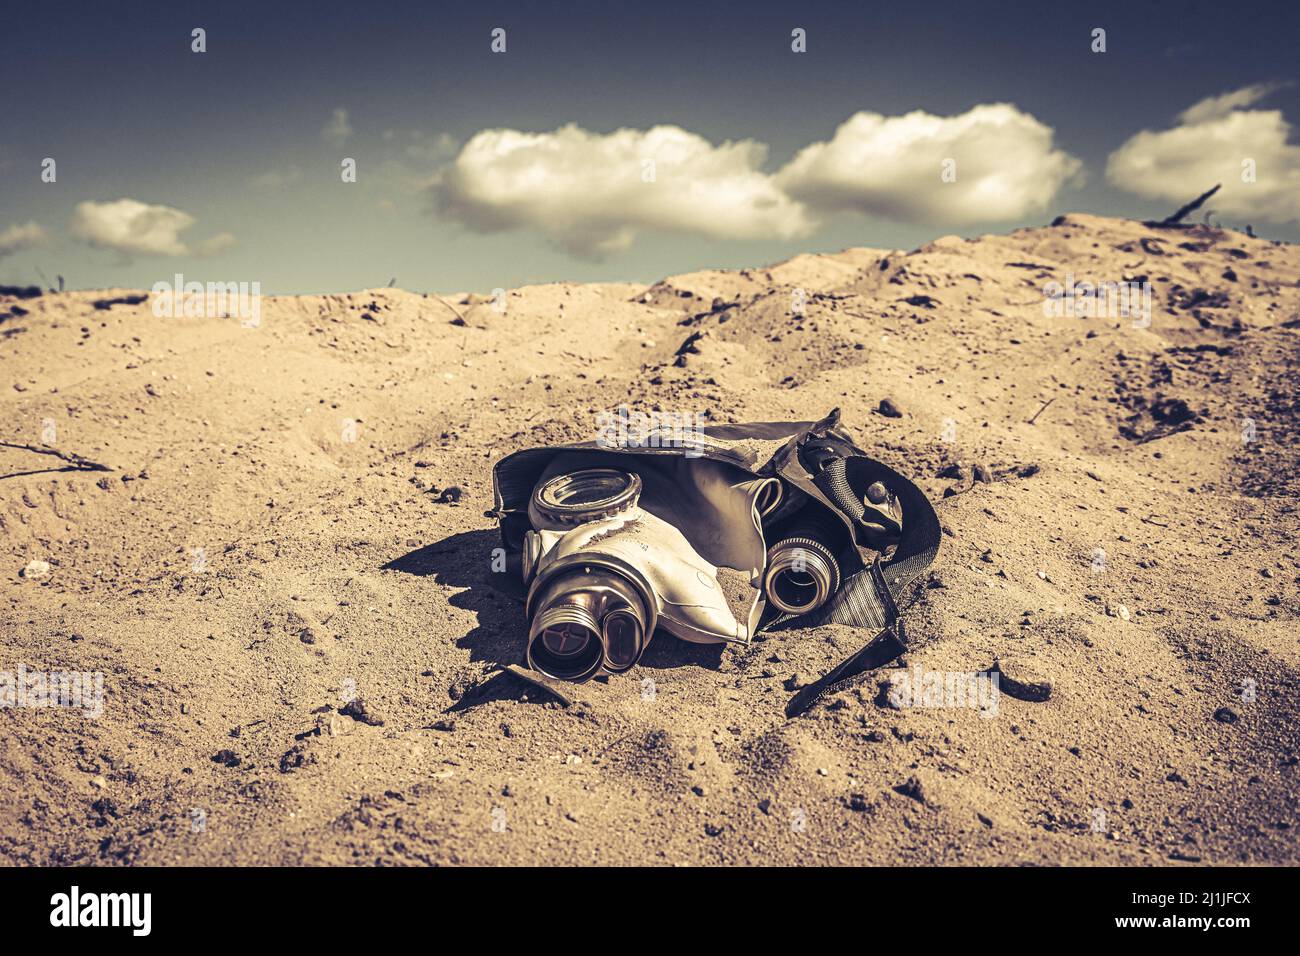 Military gas mask in the sunburned desert. Destroyed gas mask in a desert area. Stock Photo